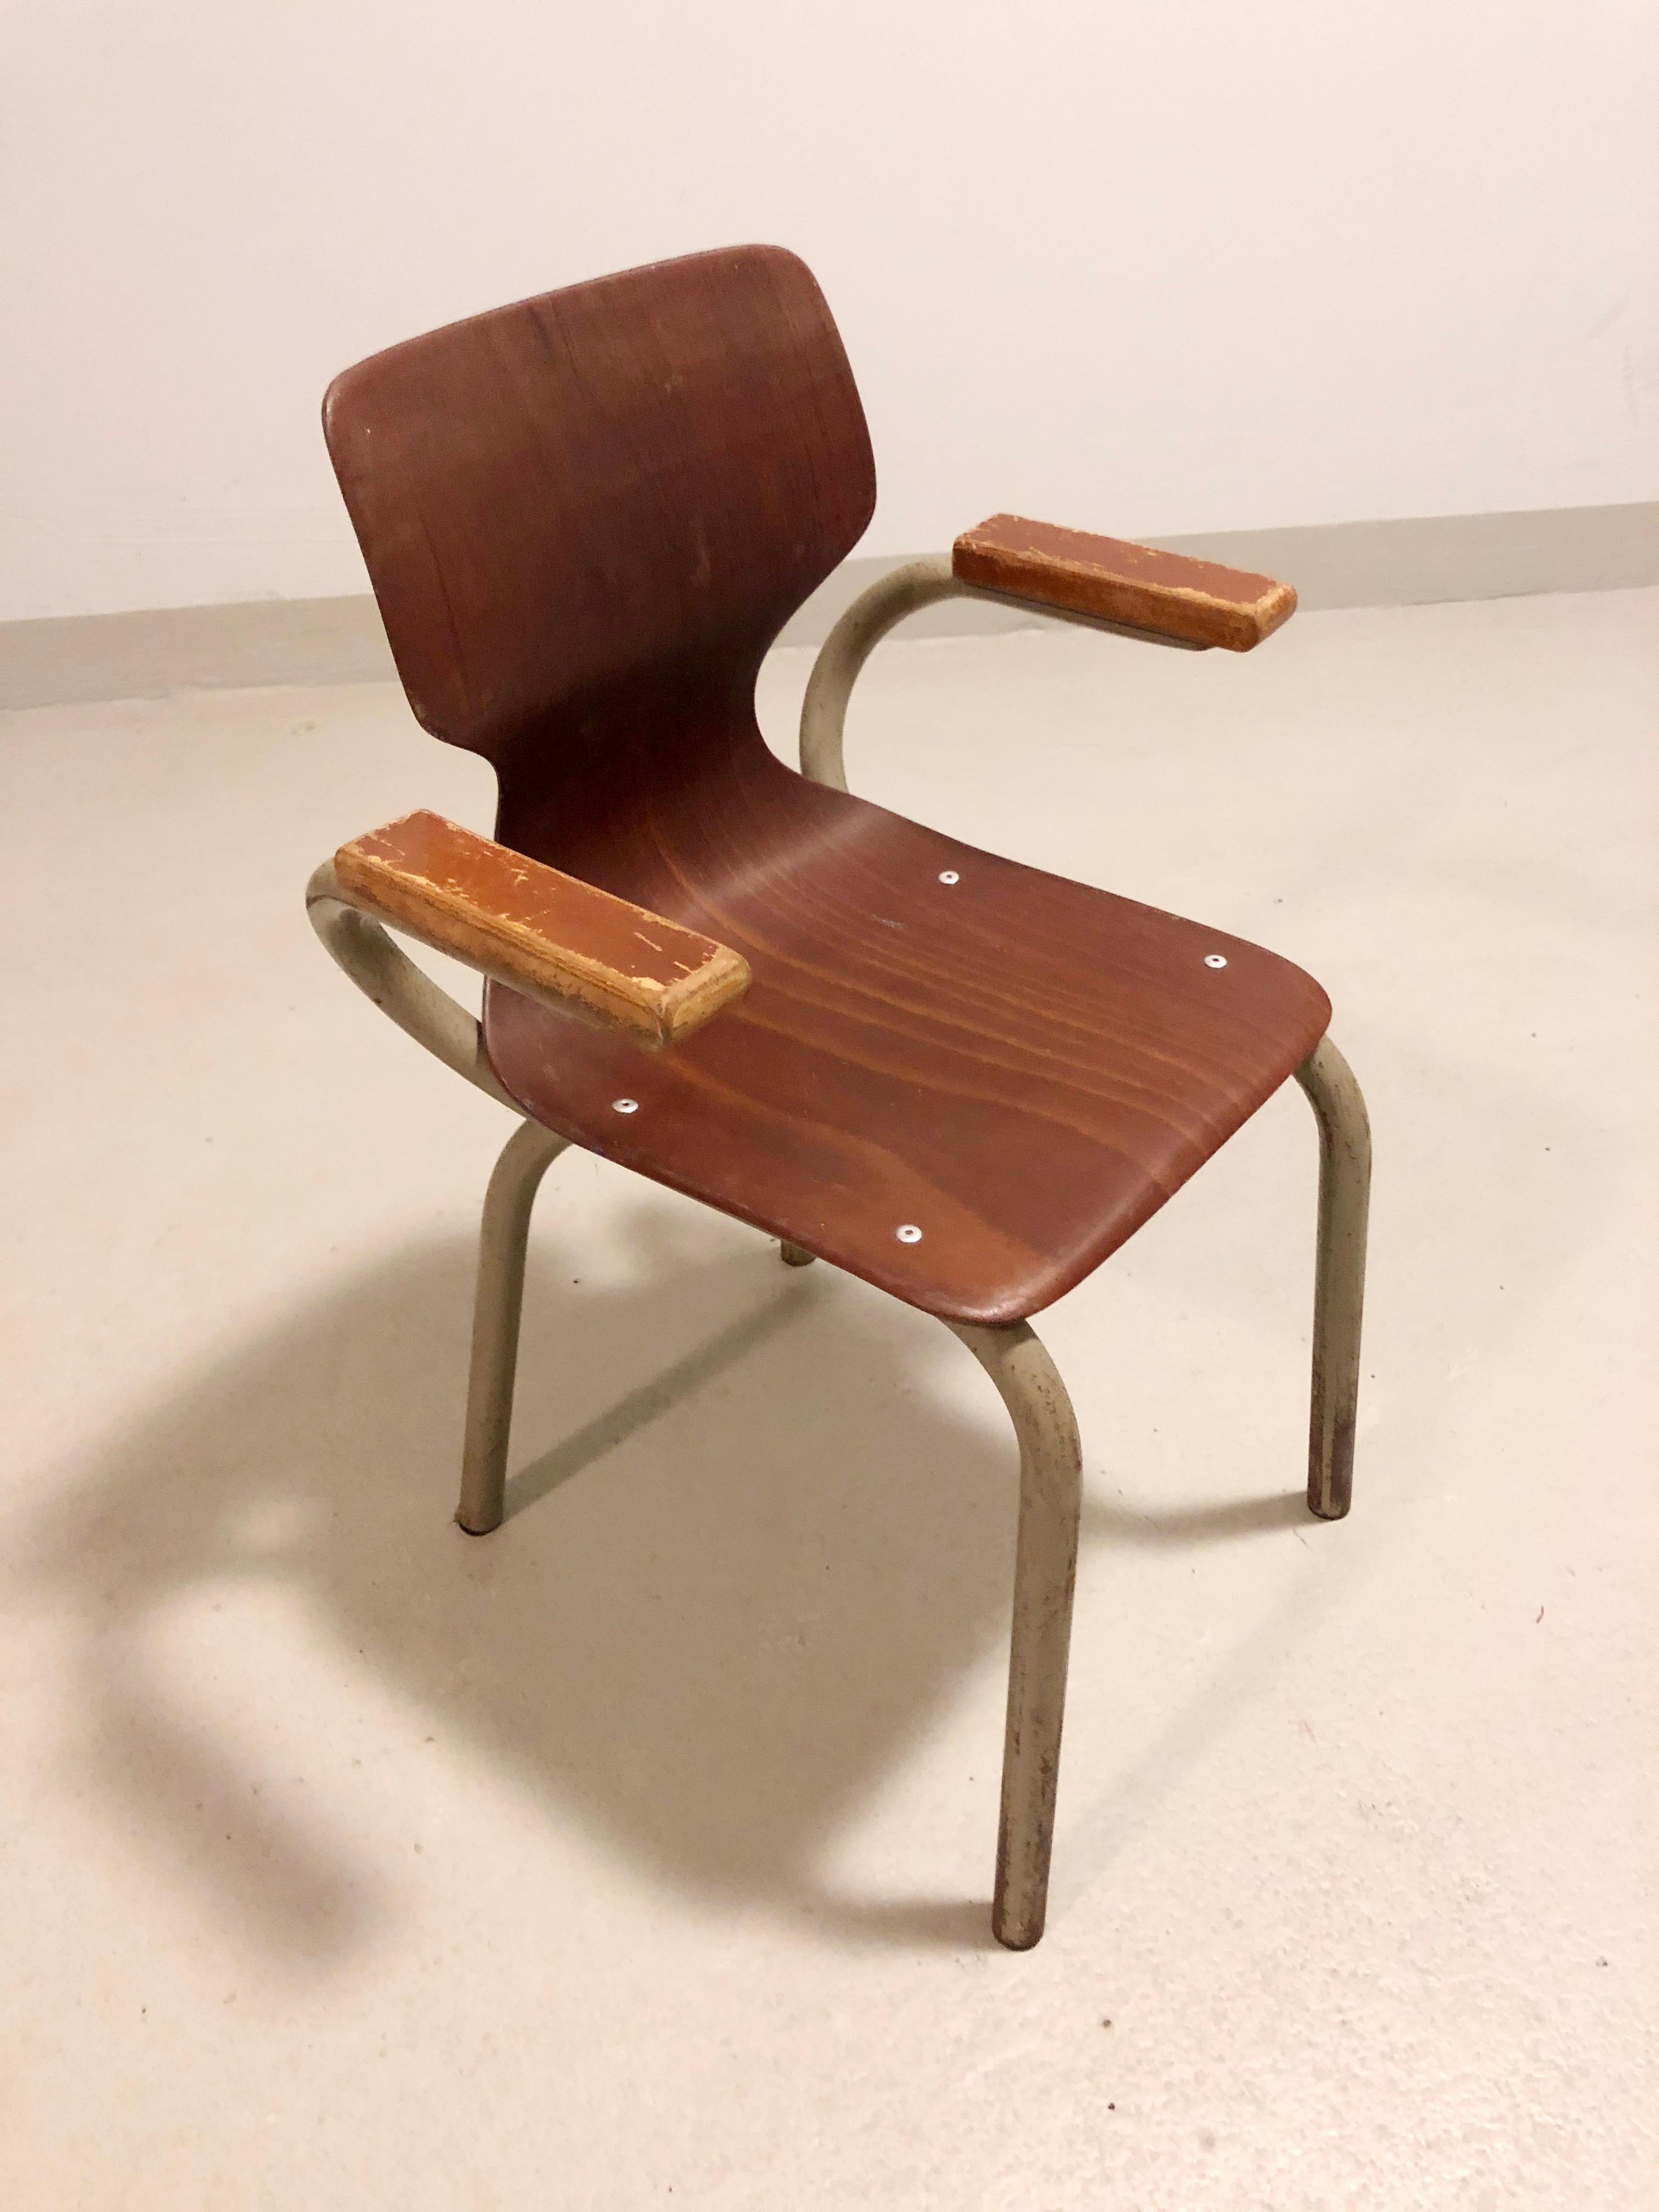 Industrial children chairs - Willy van der Meeren for Tubax - Pagholz 1970's For Sale 3